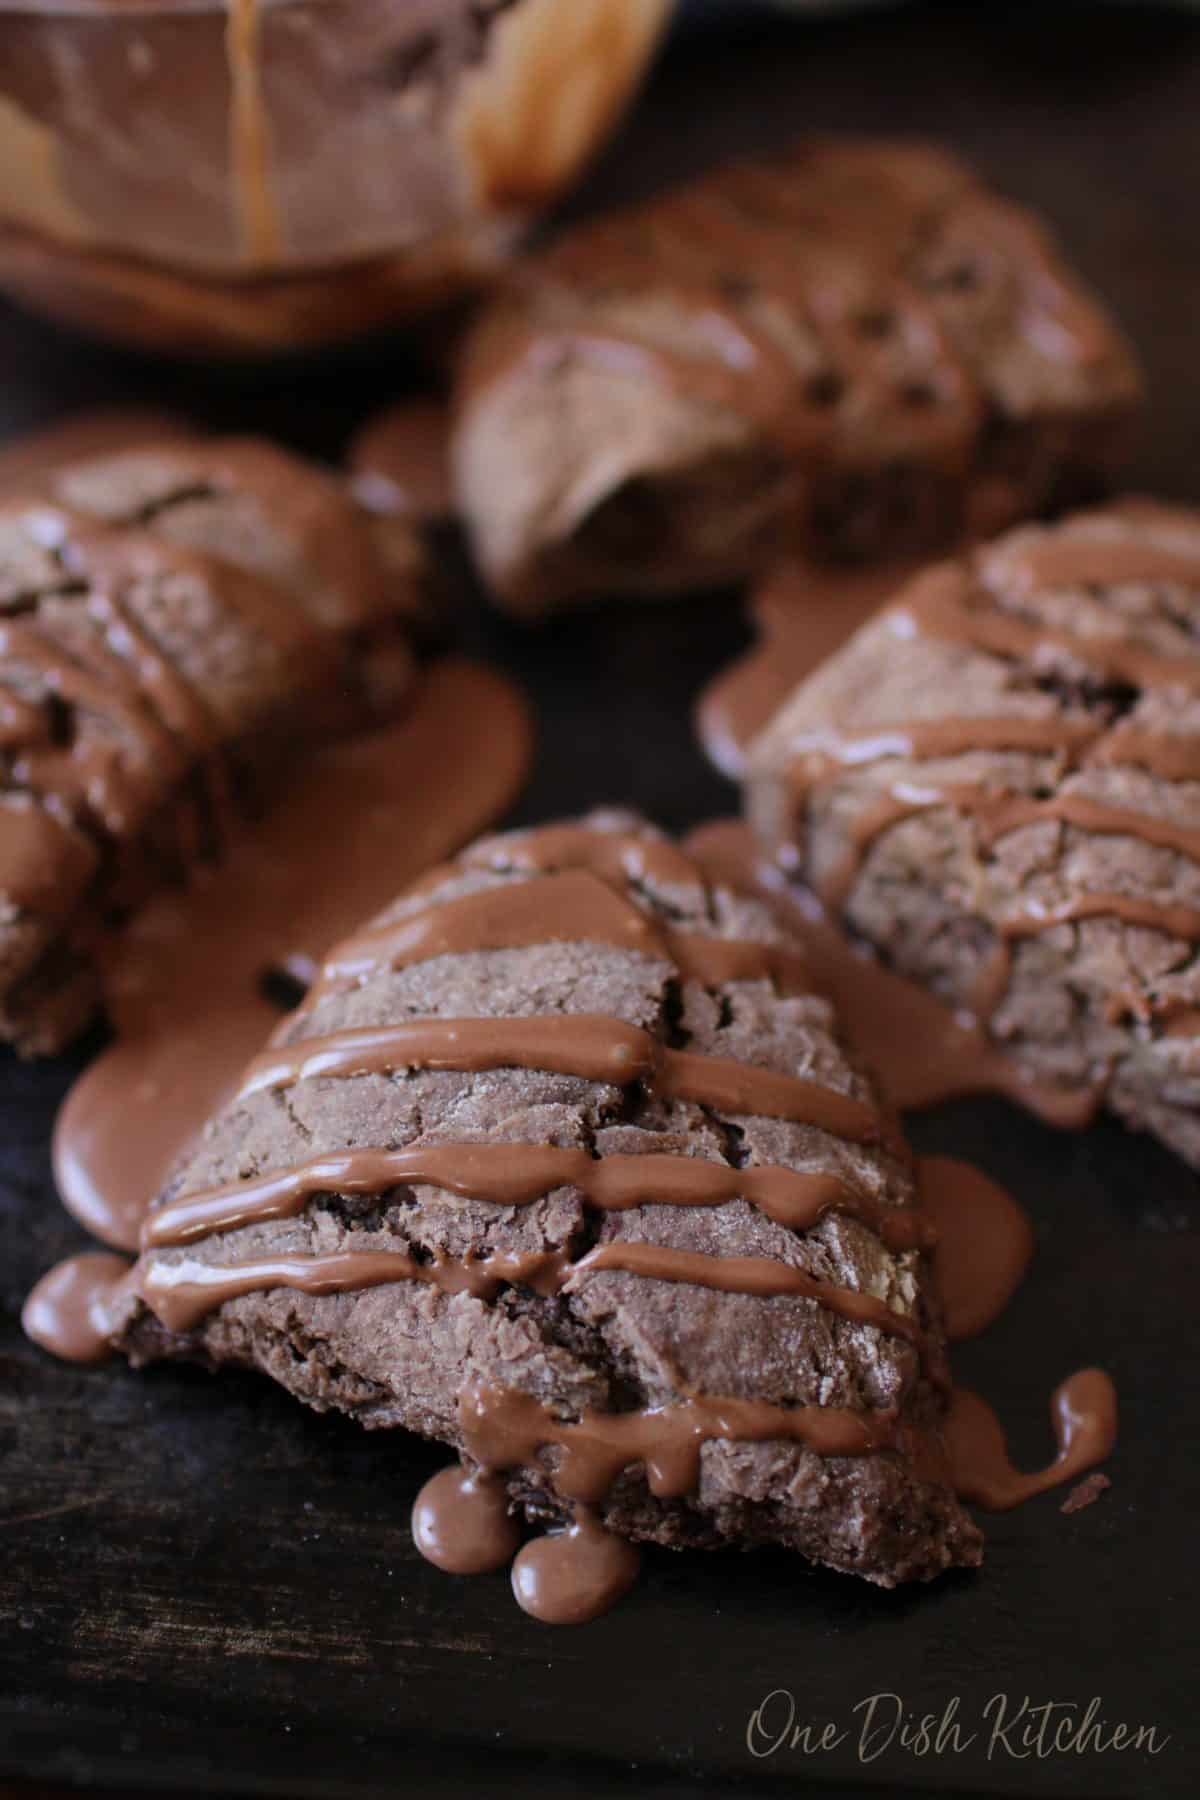 Chocolate scones with chocolate glaze dripping off the sides.